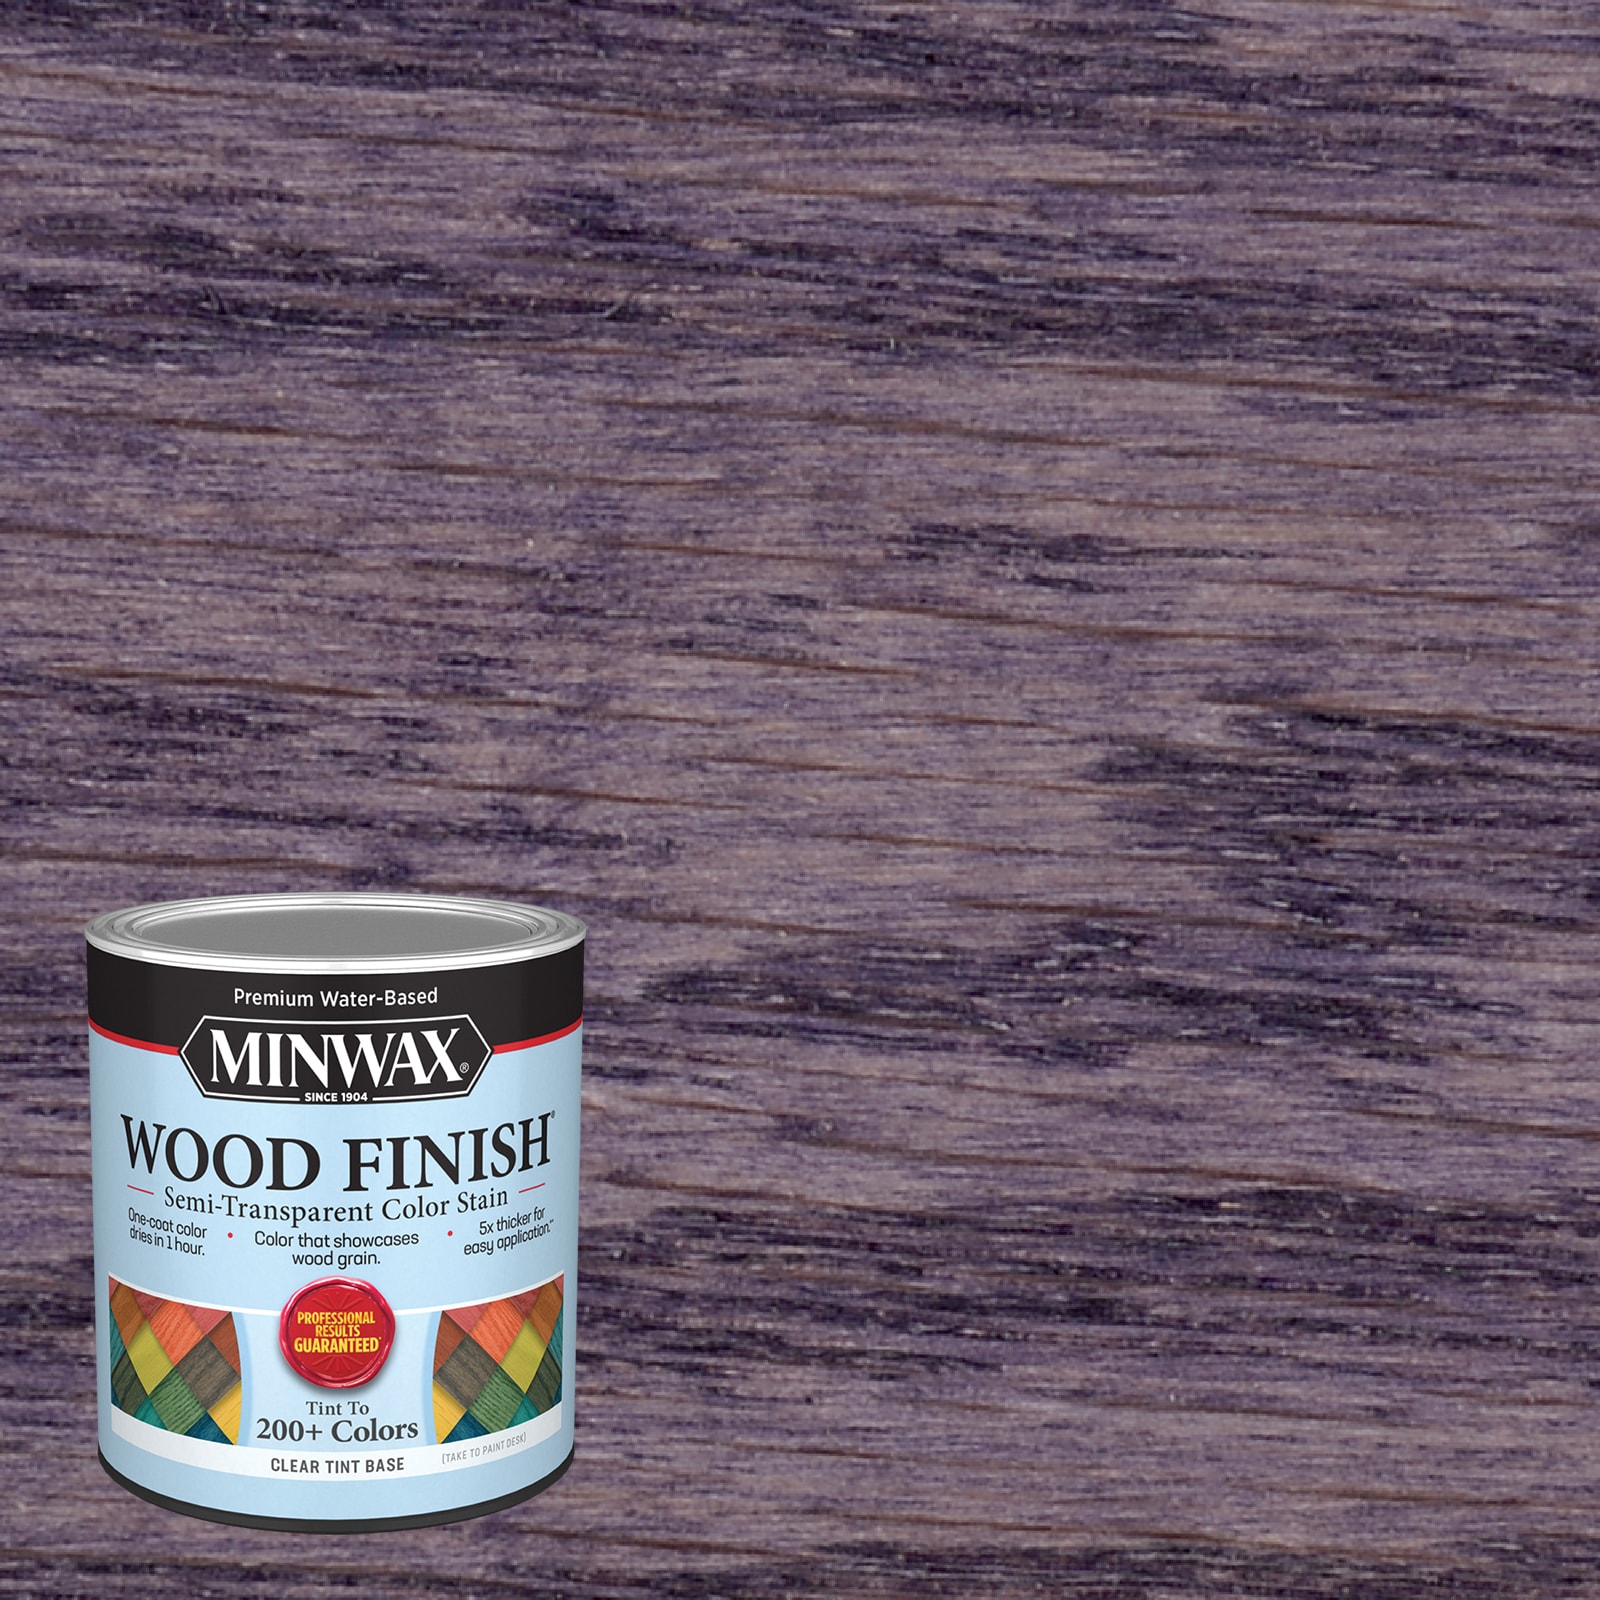 Royal Purple Wood Stain - Crafty Colors Vibrant Water Based Wood Stains